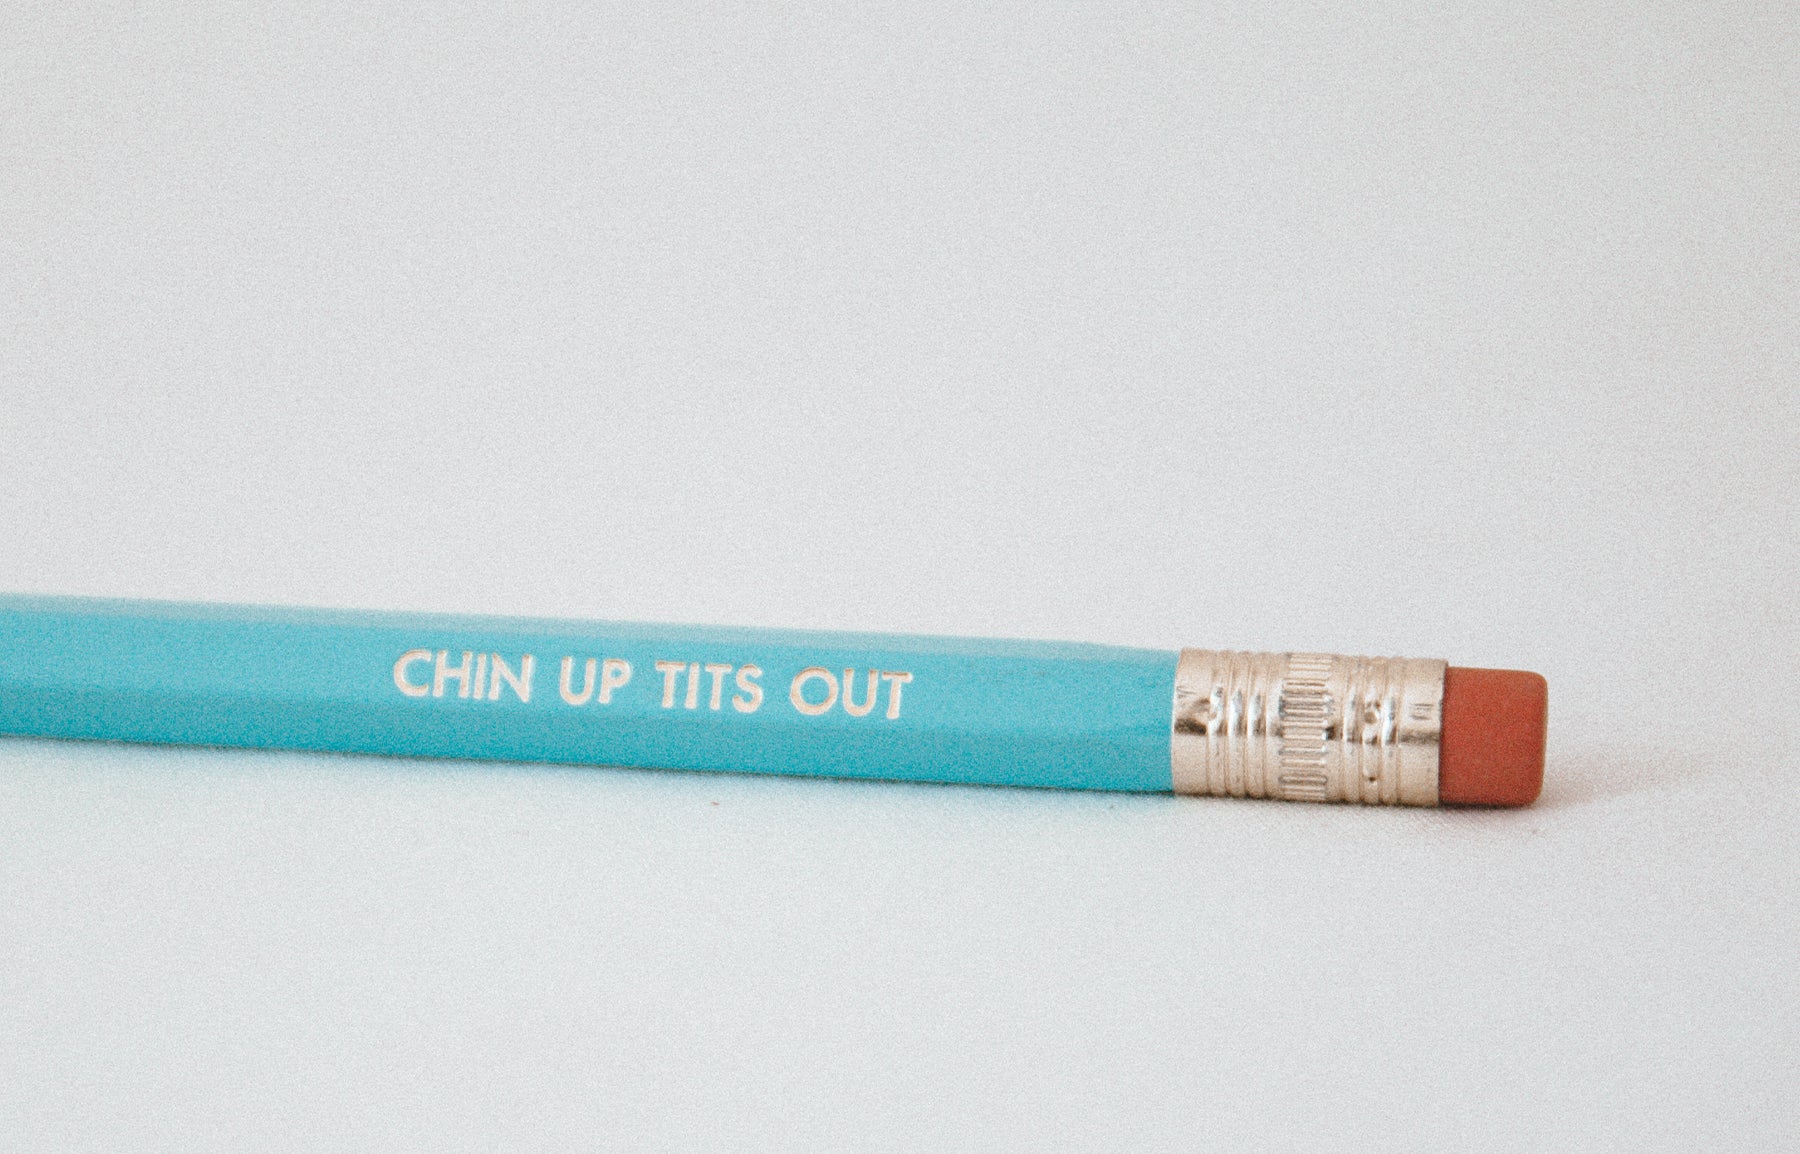 chin up, tits out pencil